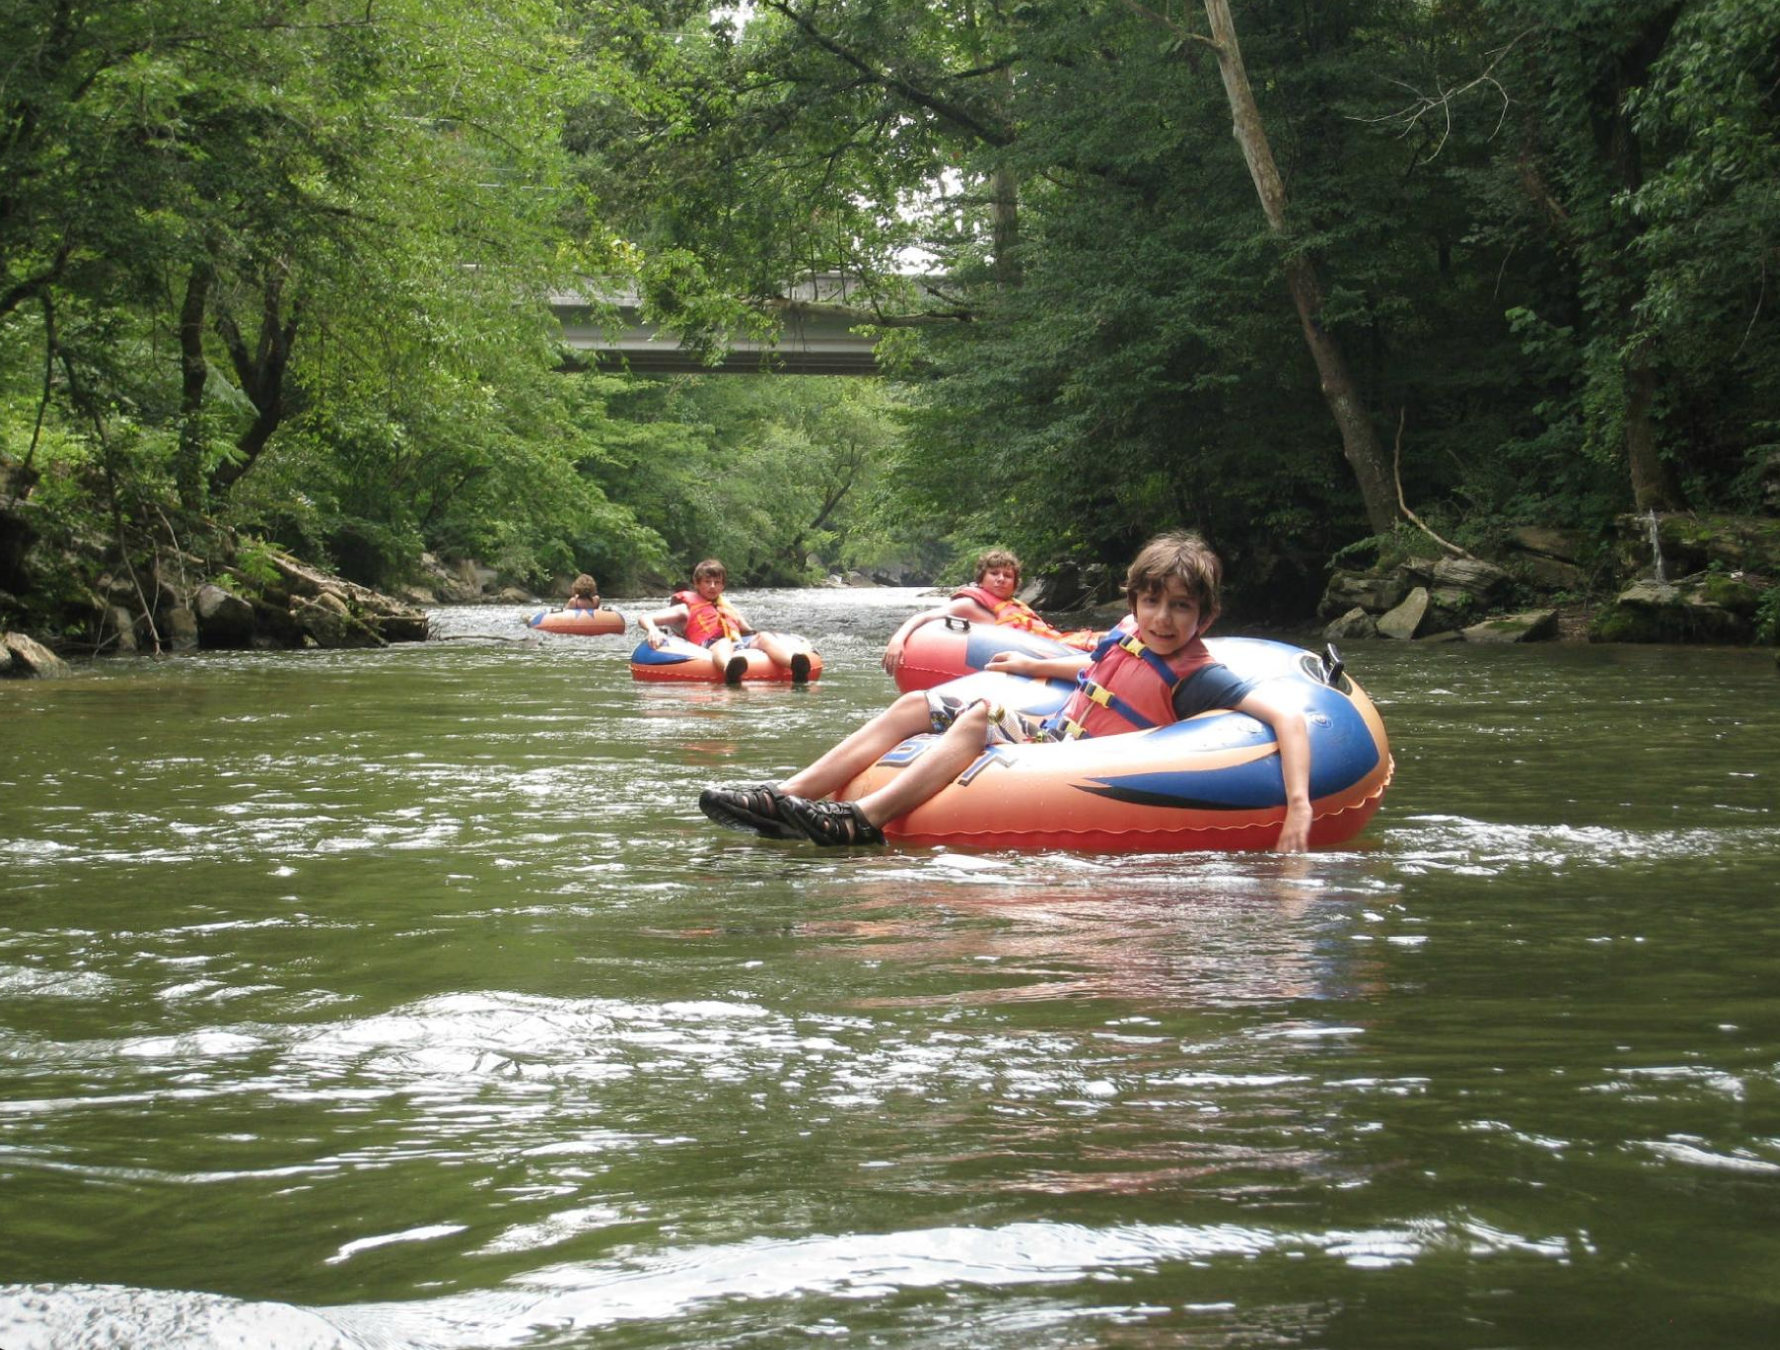 The River Romp is located in Sevierville, Tennessee